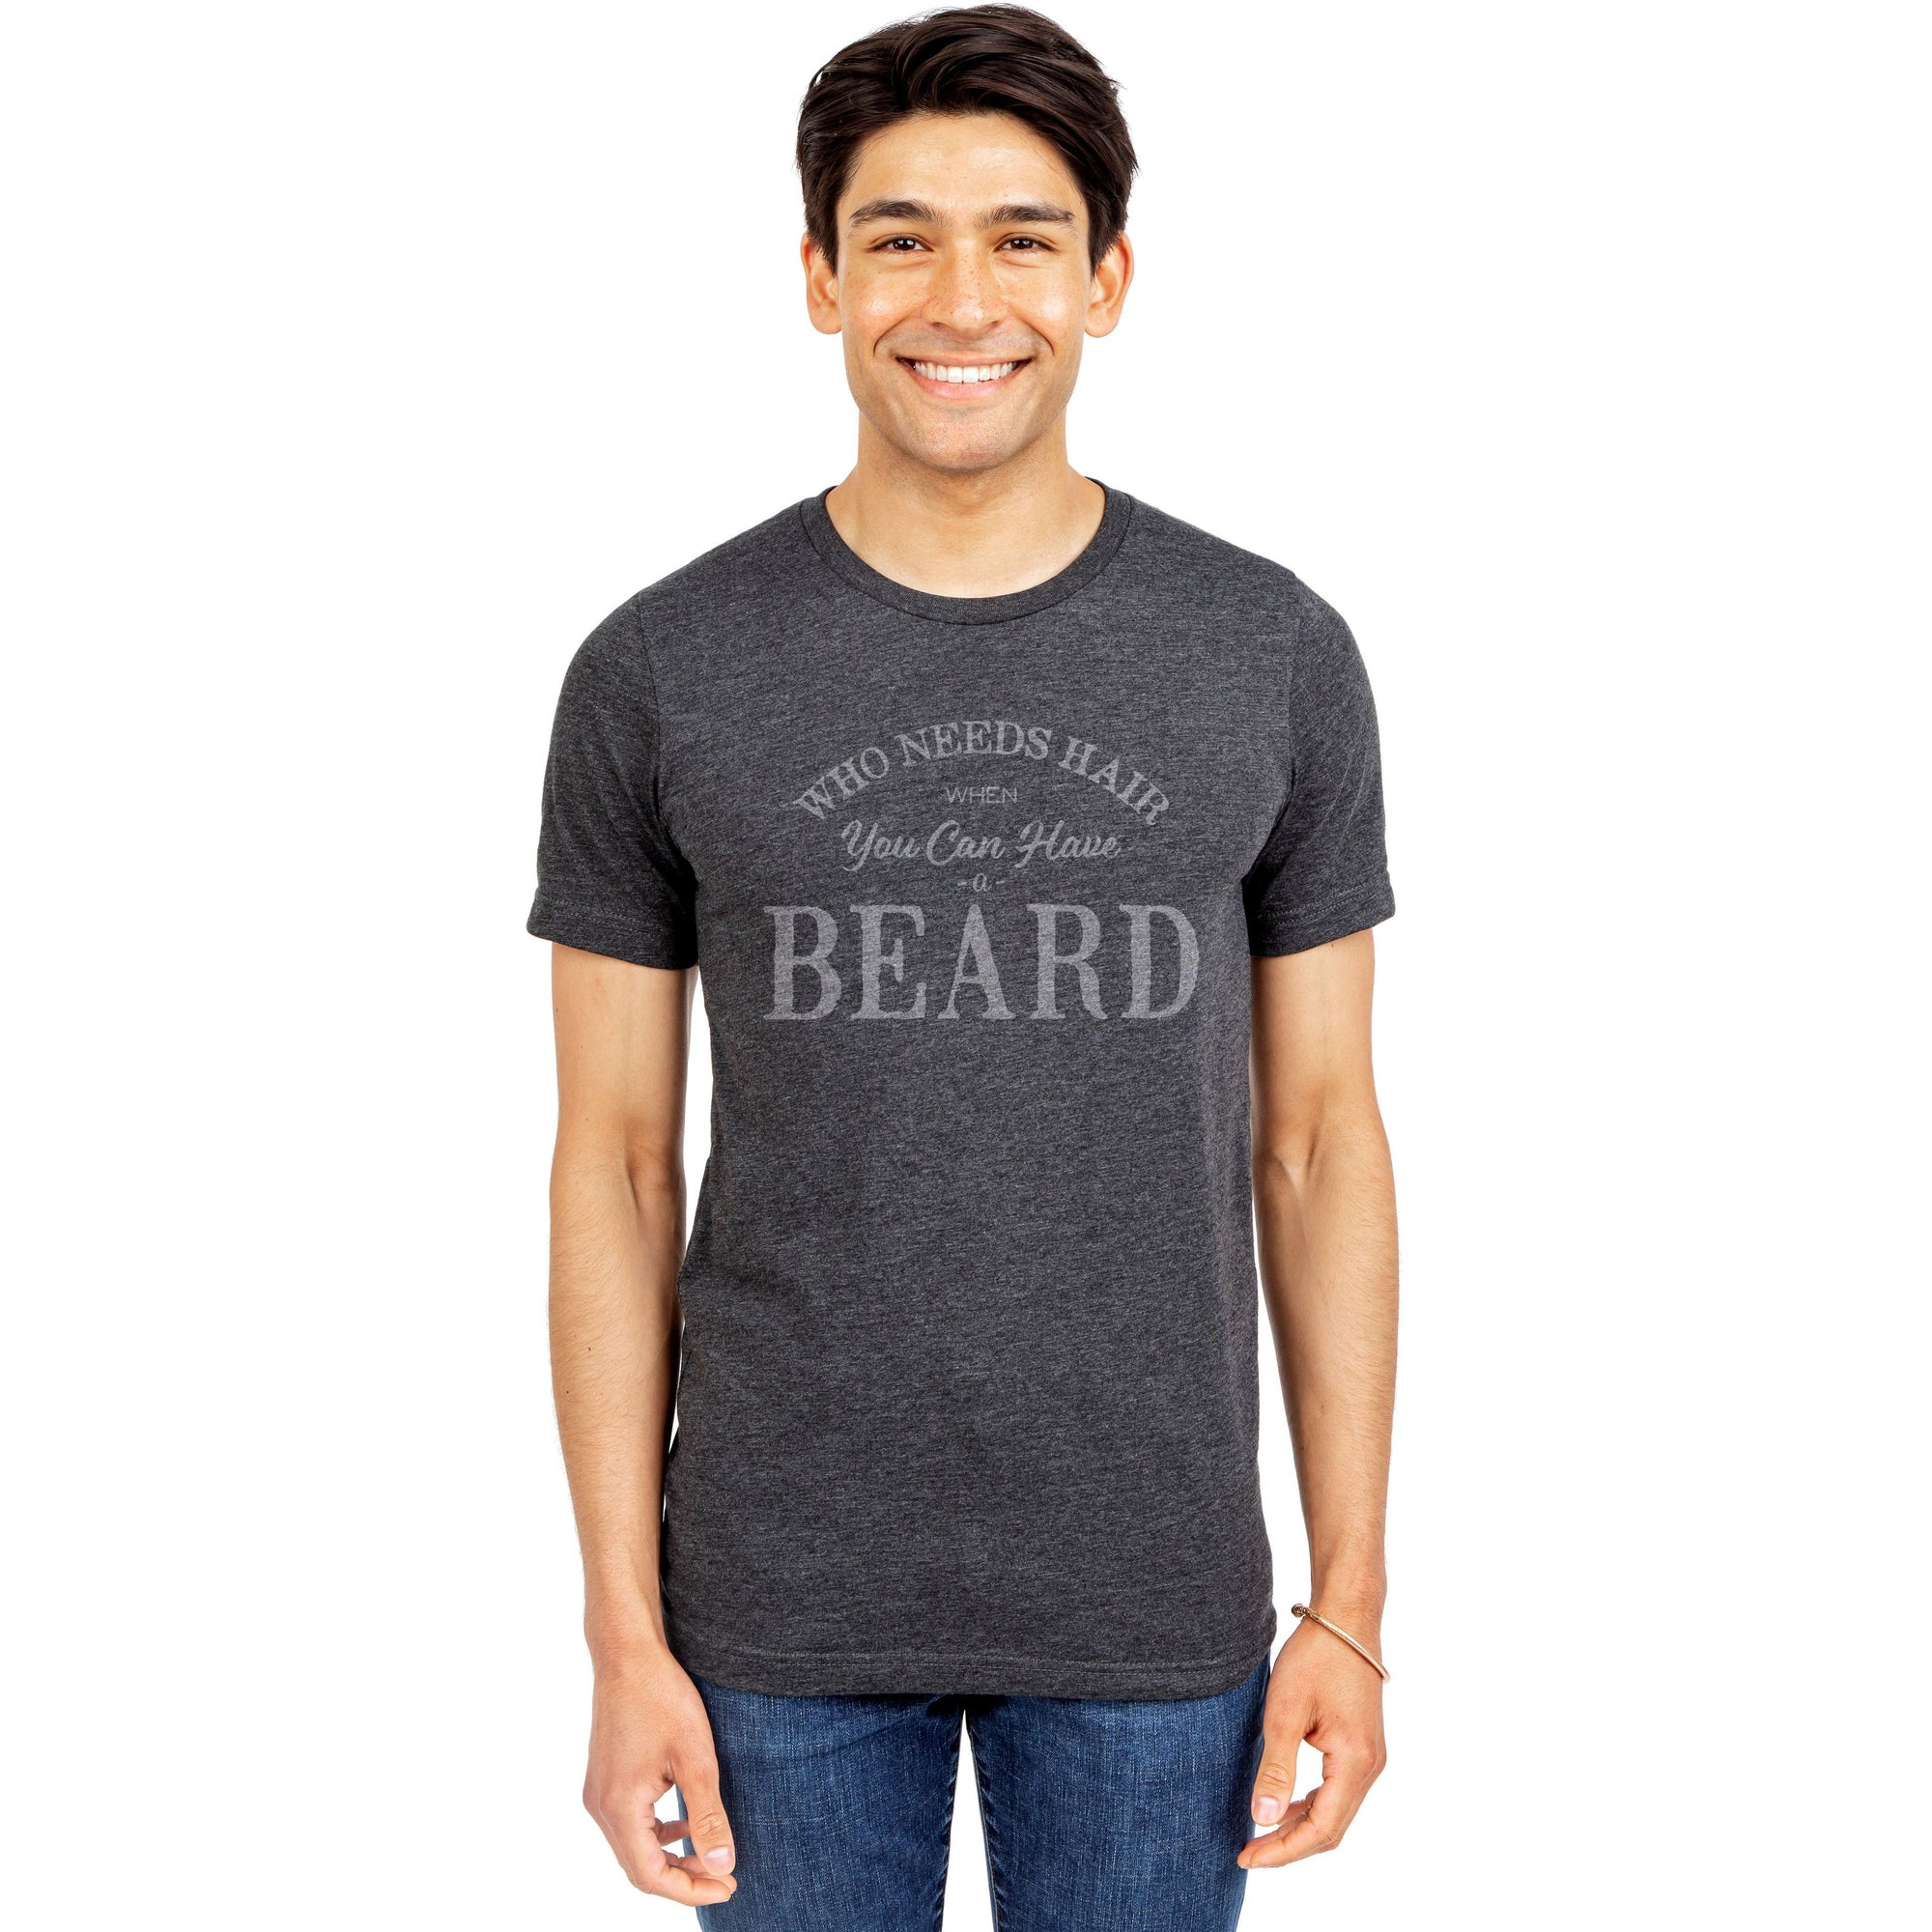 Who Needs Hair When You Can Have A Beard - Stories You Can Wear by Thread Tank